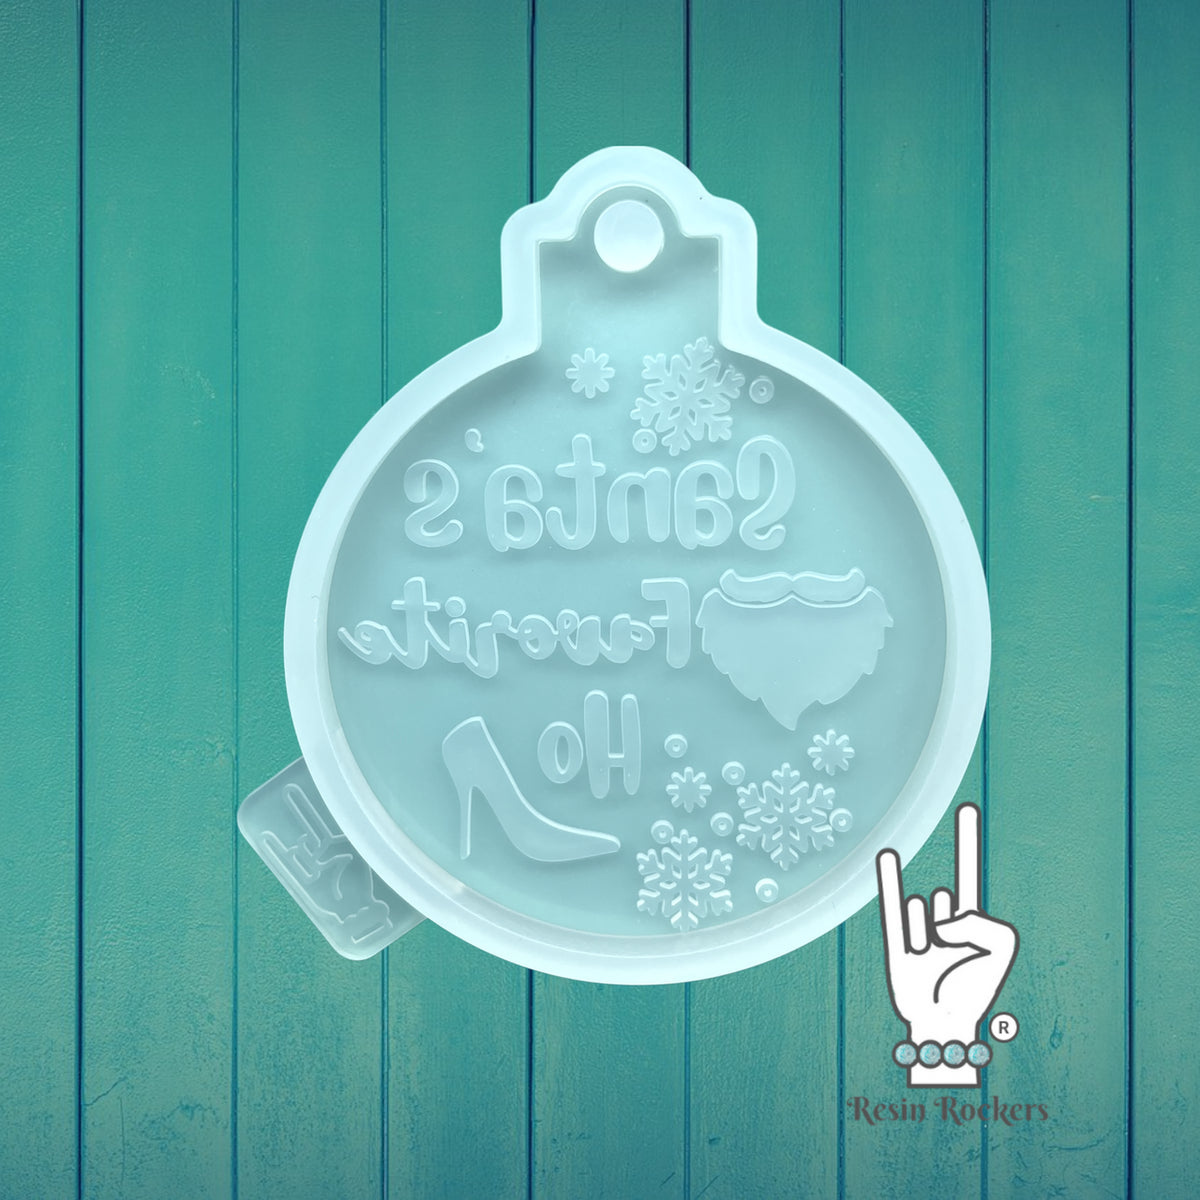 UV Safe Santas&#39;a Favorite Ho Resin Rockers Exclusive Ornament Mold for UV and Epoxy Resin Art